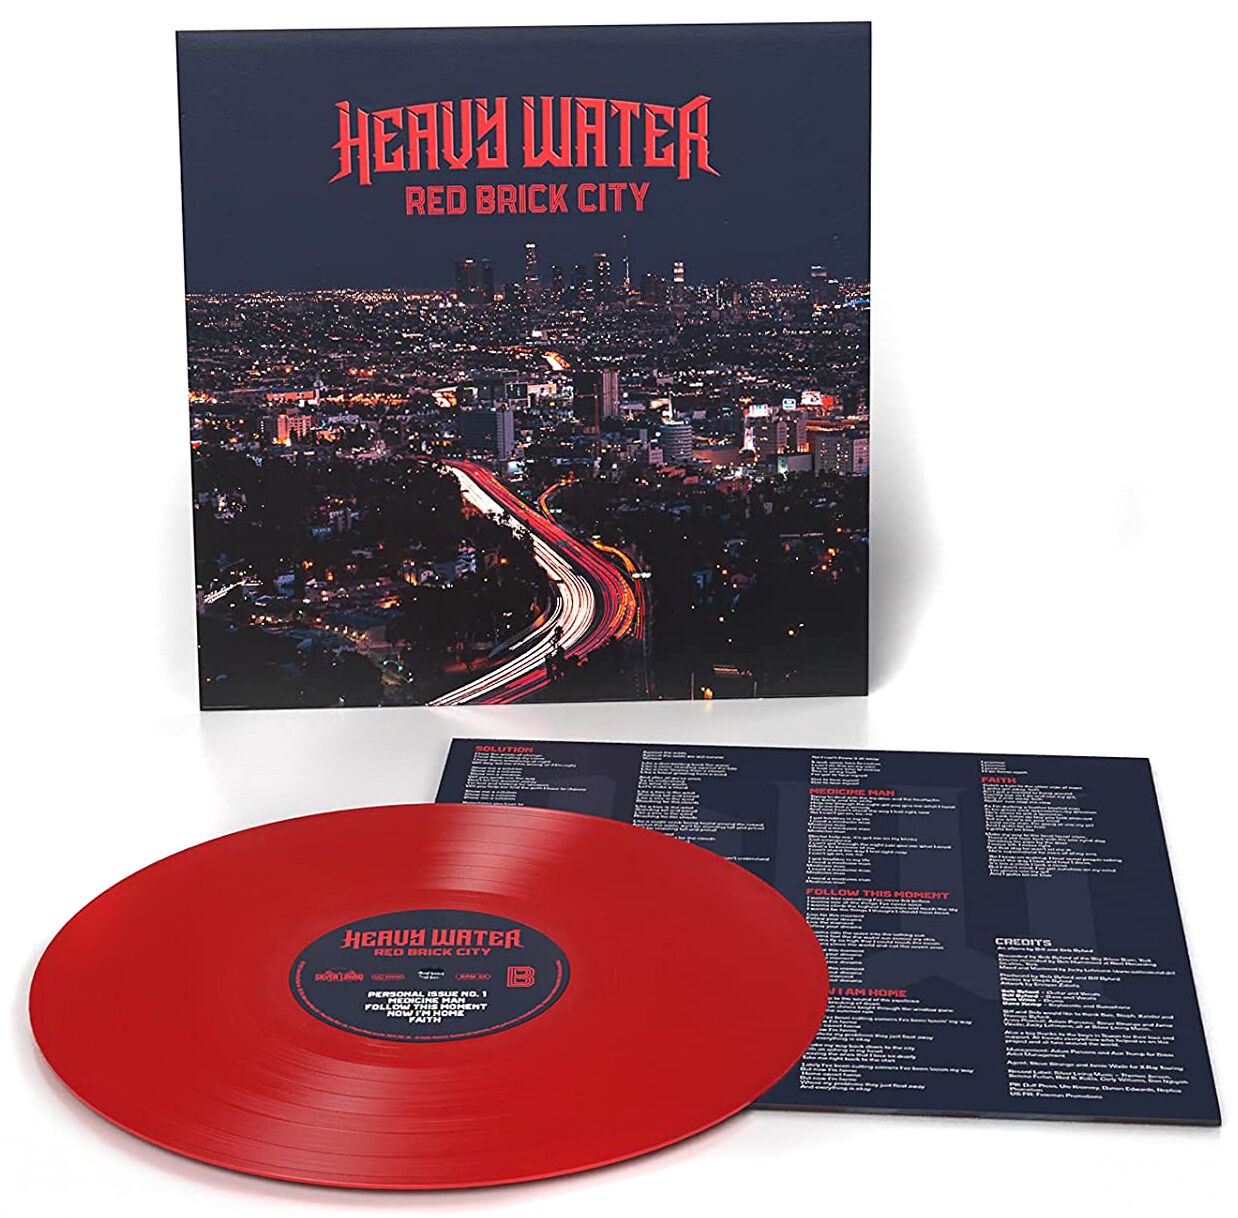 Image of Heavy Water Red brick city LP farbig